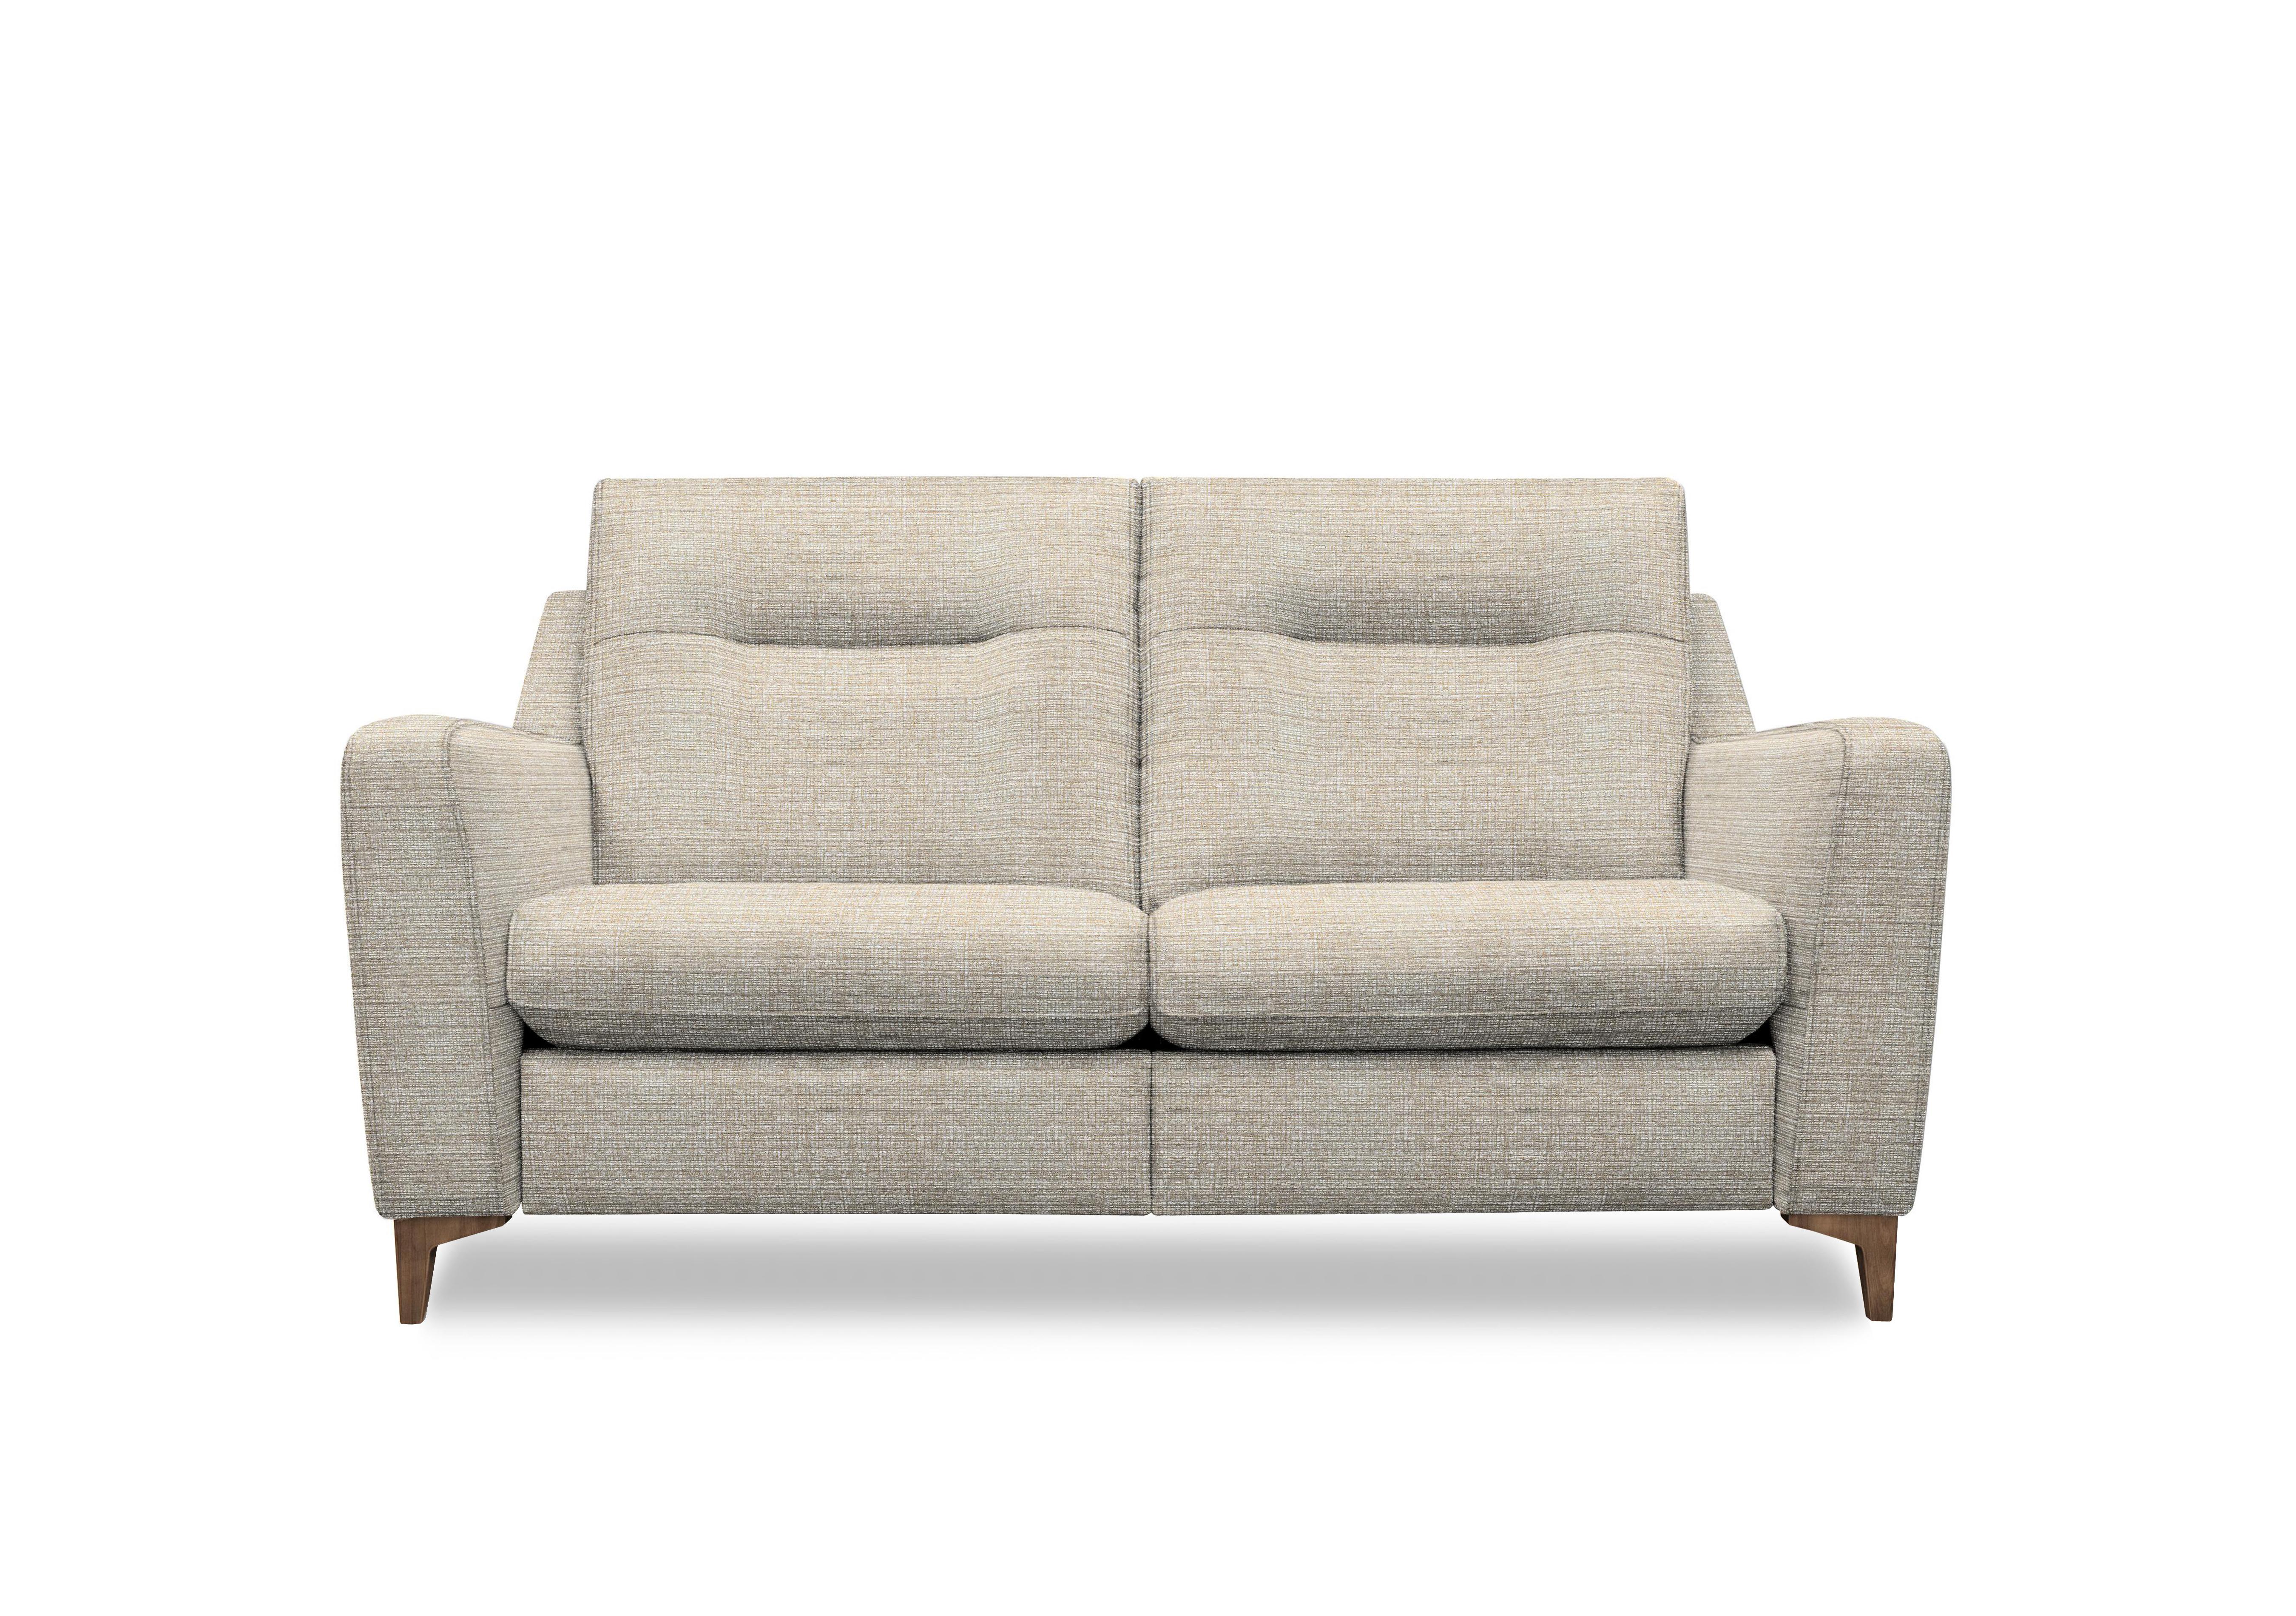 Arlo 2 Seater Fabric Sofa in A006 Yarn Shale Wal Ft on Furniture Village